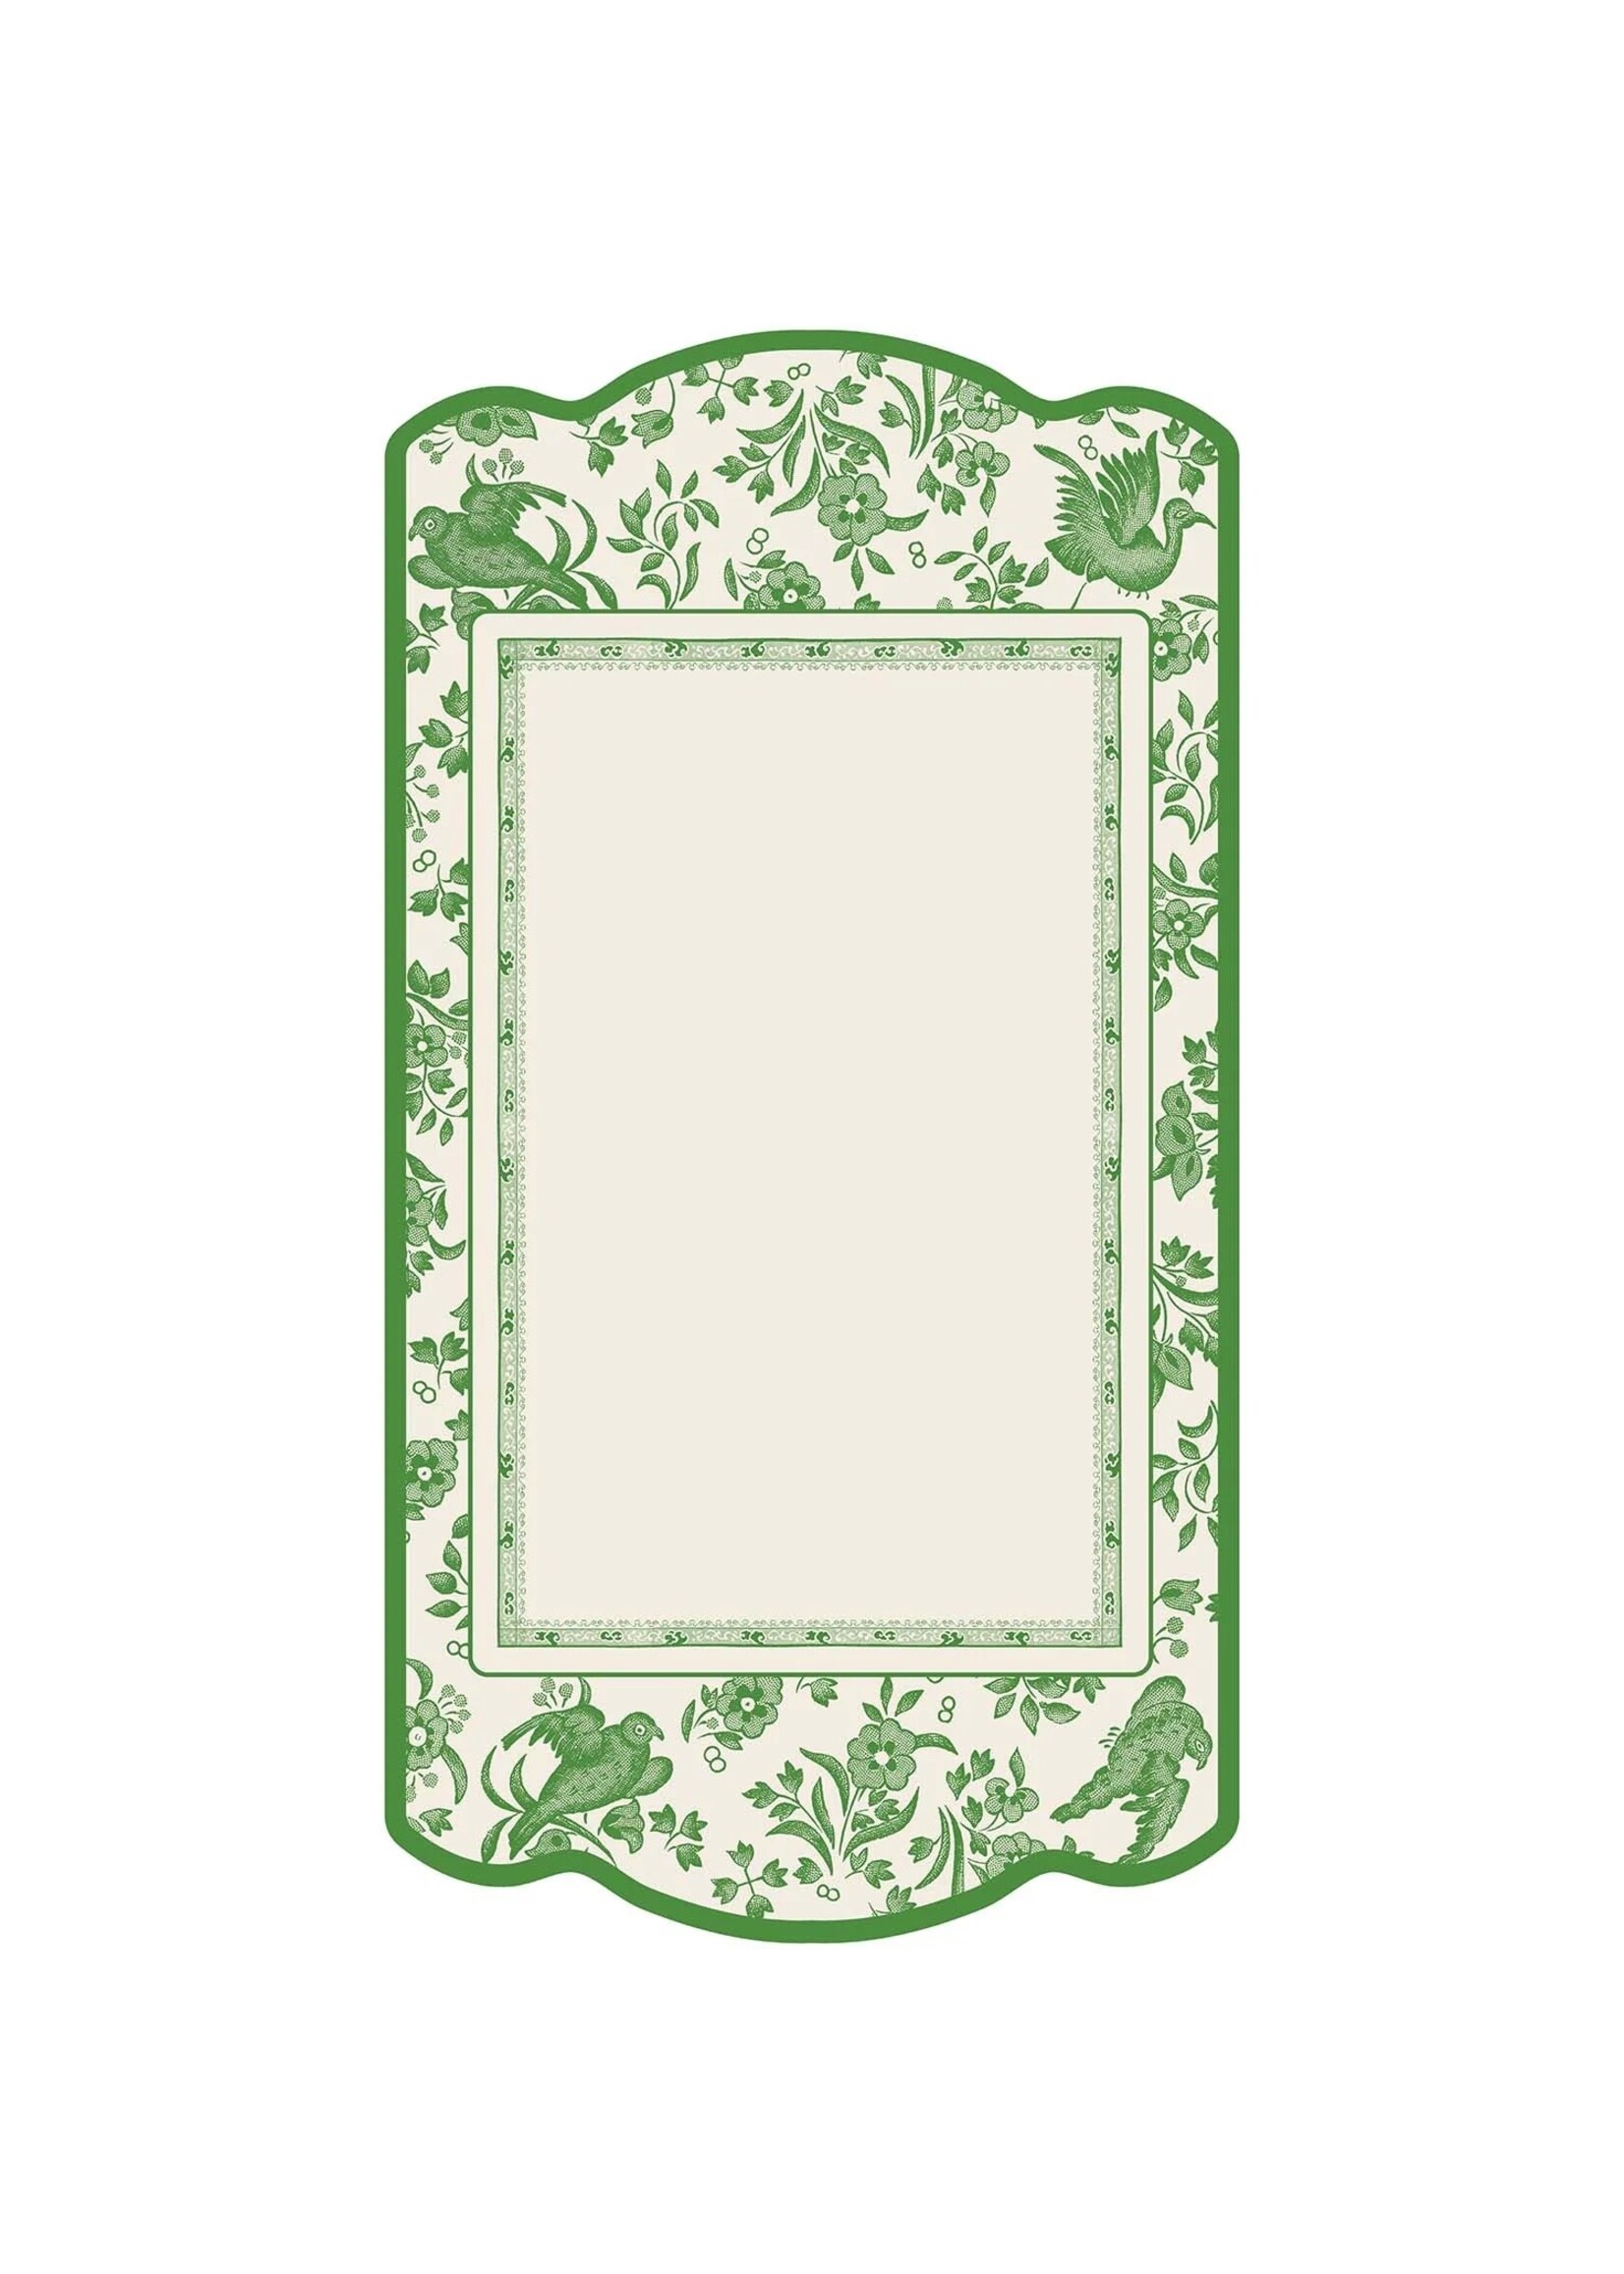 Hester & Cook Table Card - Regal Peacock Green (pack of 12)